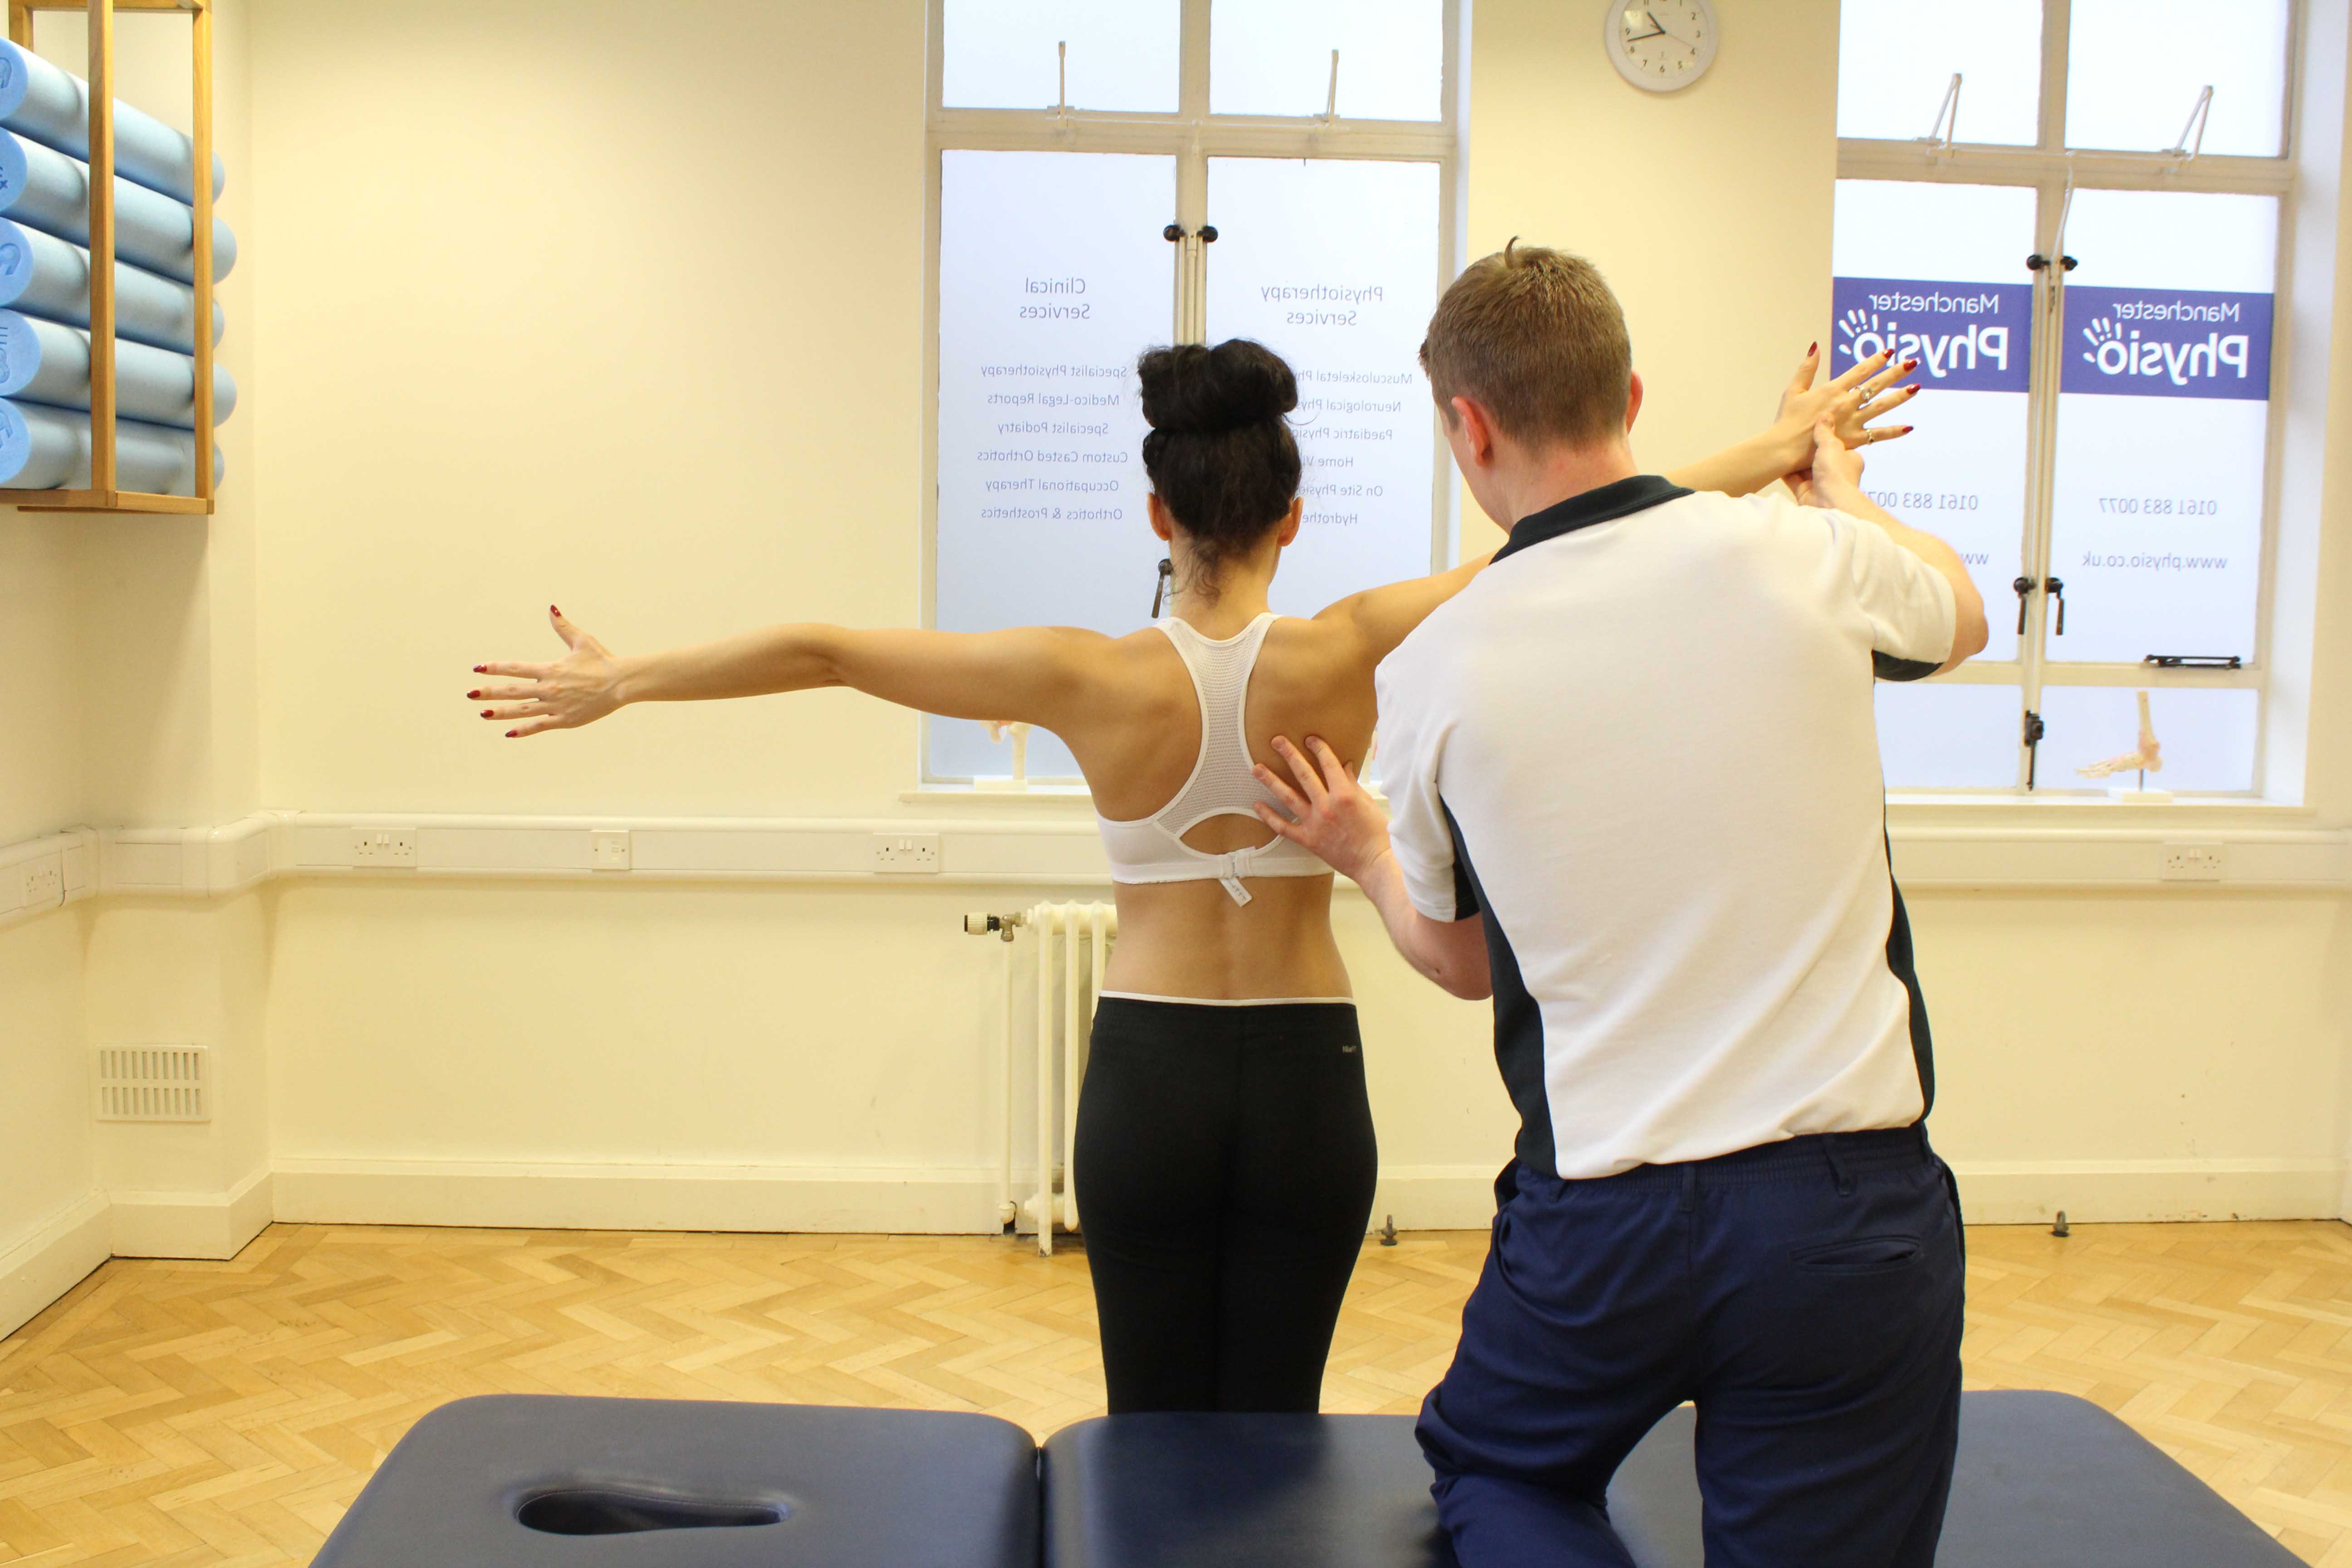 Scapular movement assessment by experienced MSK Physiotherapist